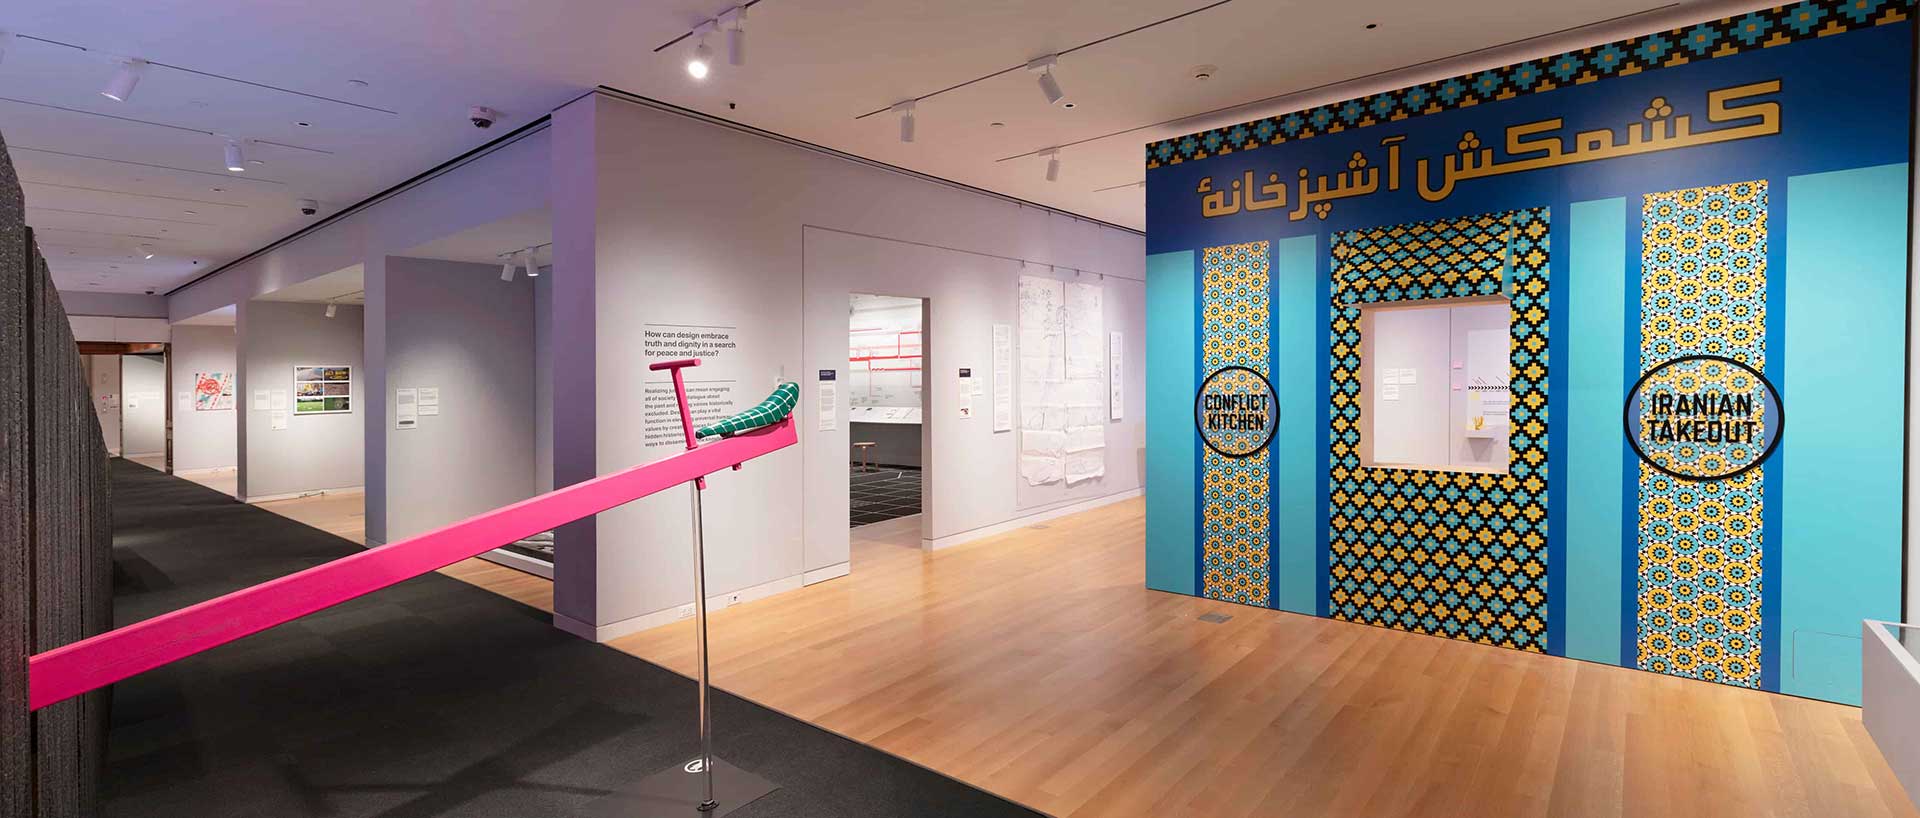 Cooper Hewitt's &lsquo;Designing Peace&rsquo; offers a glimpse of the potential of design as a tool for world harmony